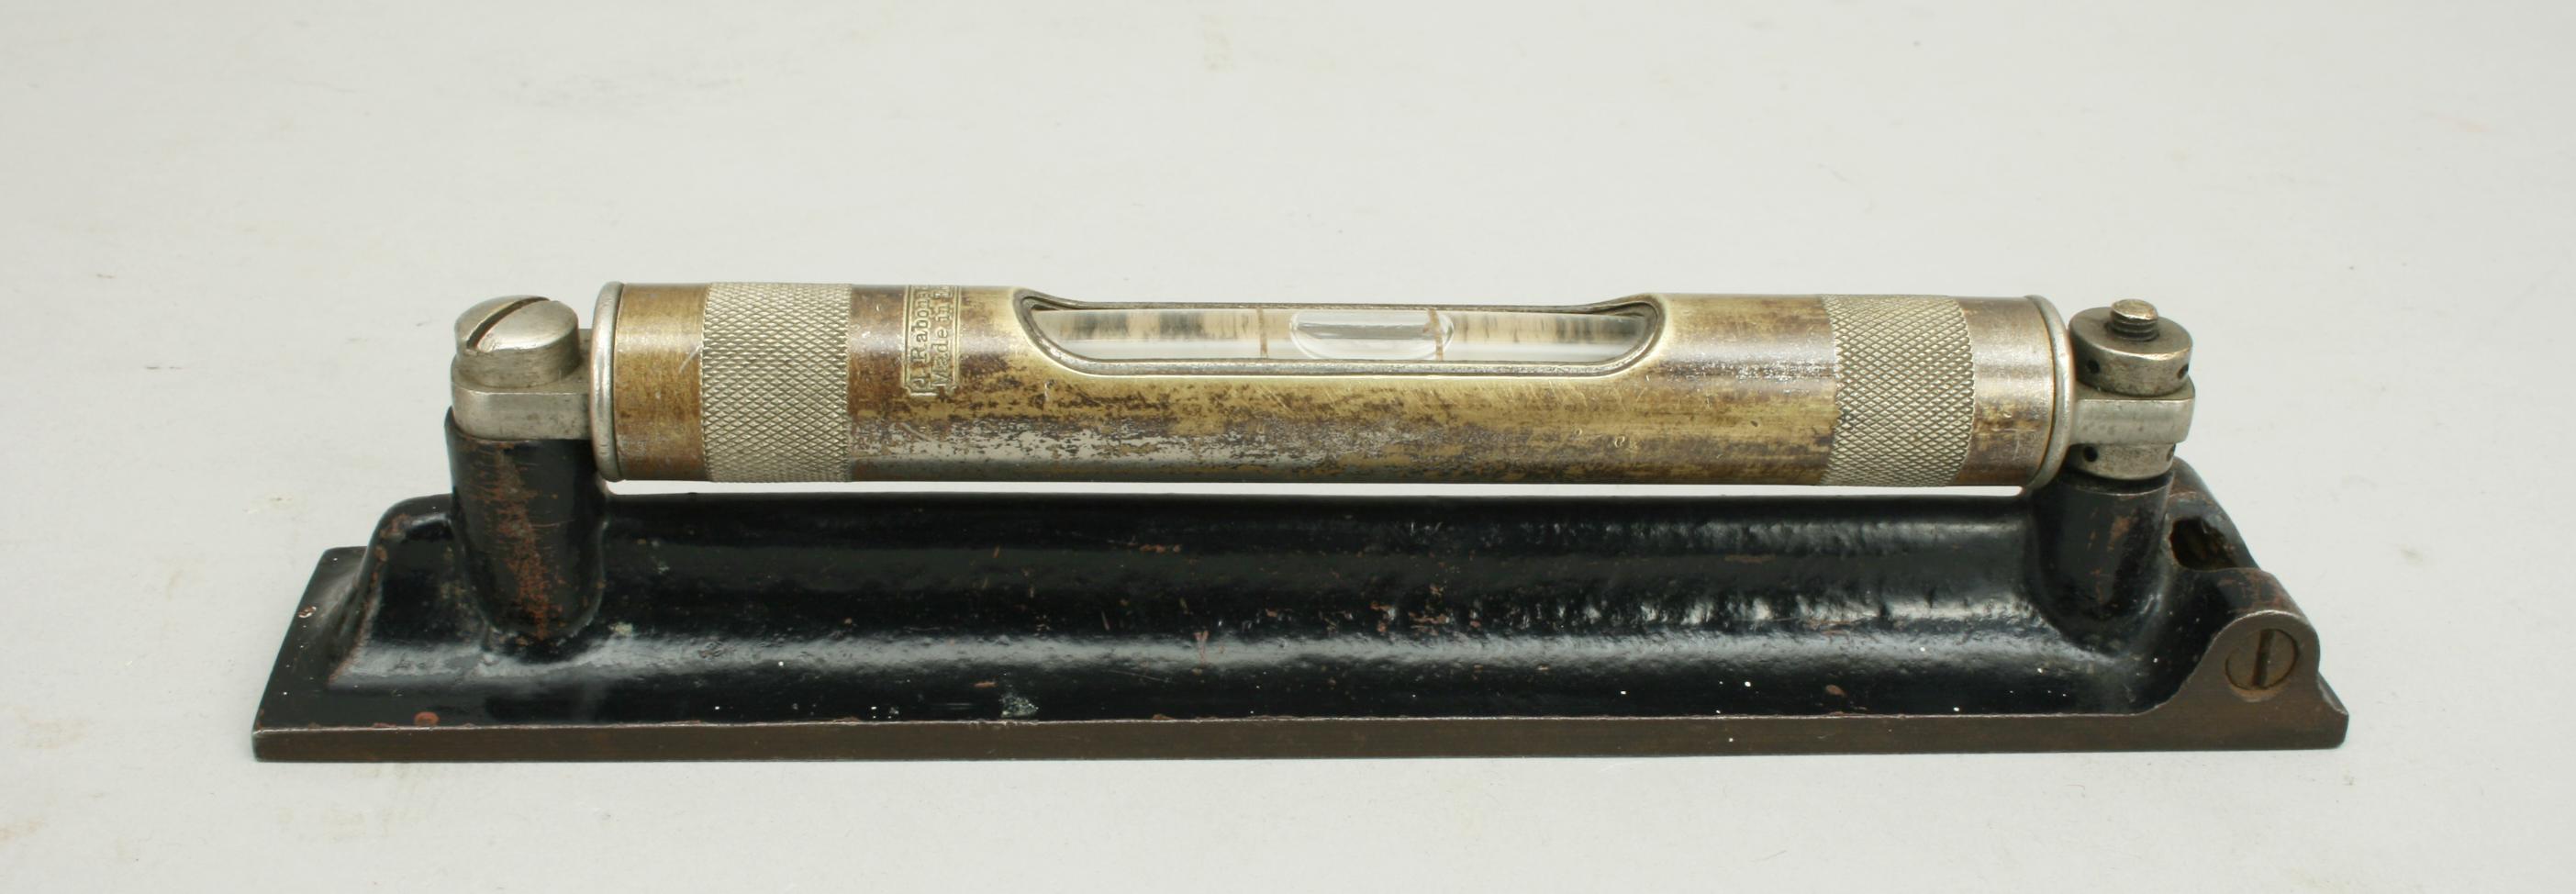 J. Rabone & Sons Engineers Spirit Level.
A vintage brass engineers spirit level made in England by John Rabone & Sons, Birmingham. This early 20th century level has a swivel cover to protect the glass tube and is mounted onto a cast iron base. The